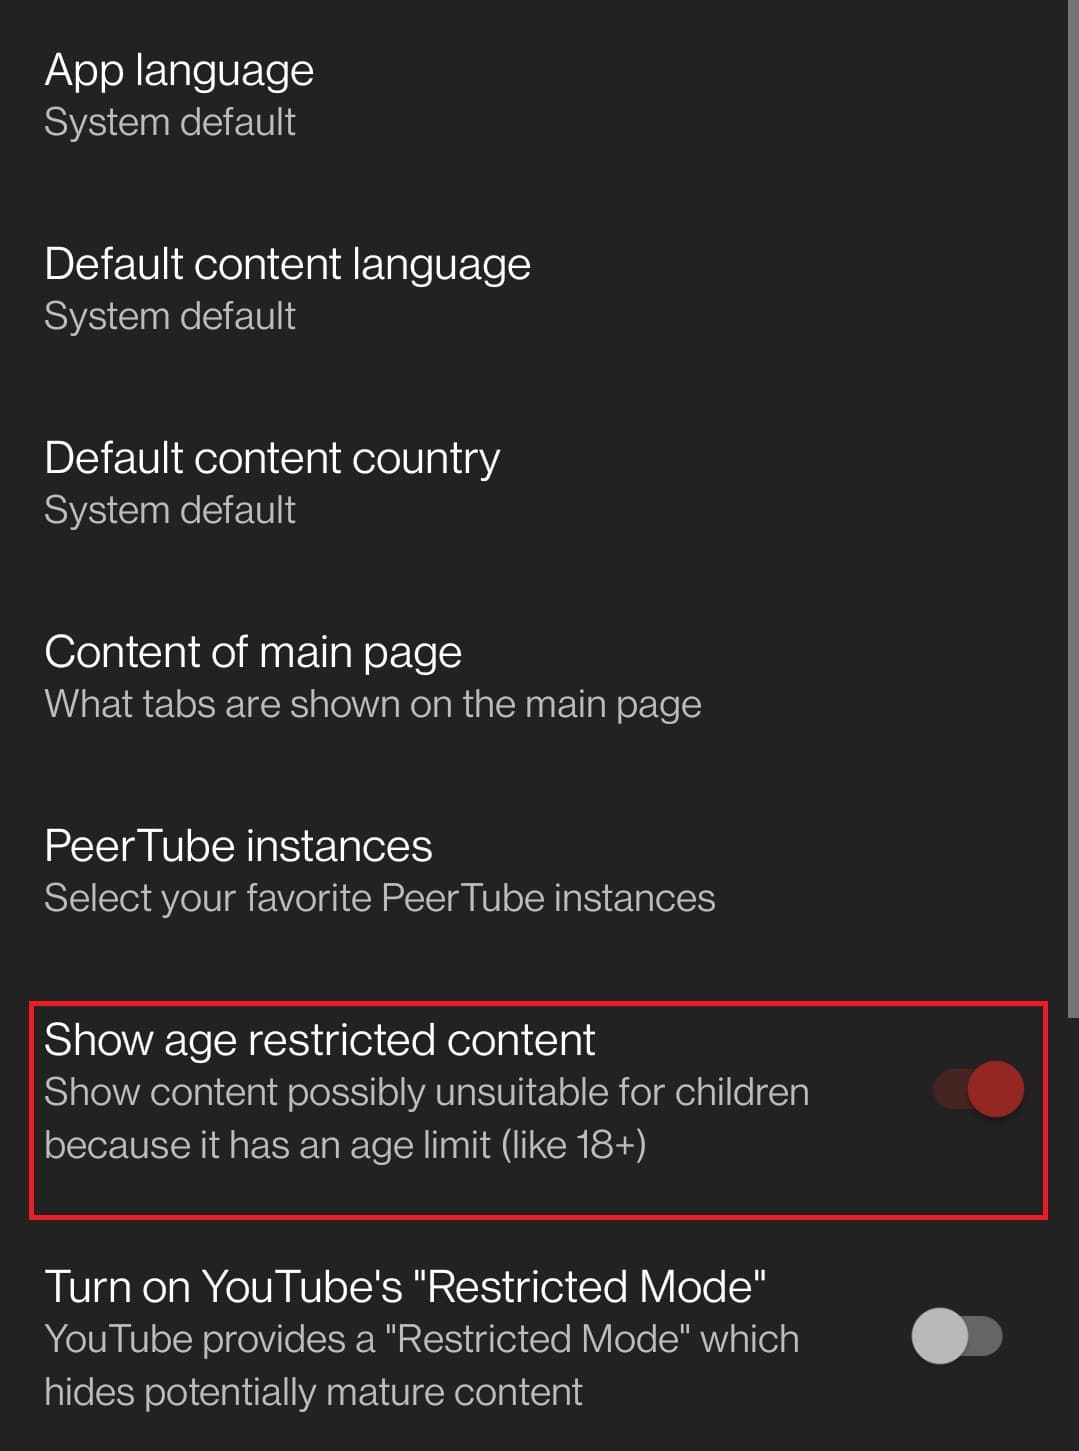 Toggle on the bar next to Show age restricted content.